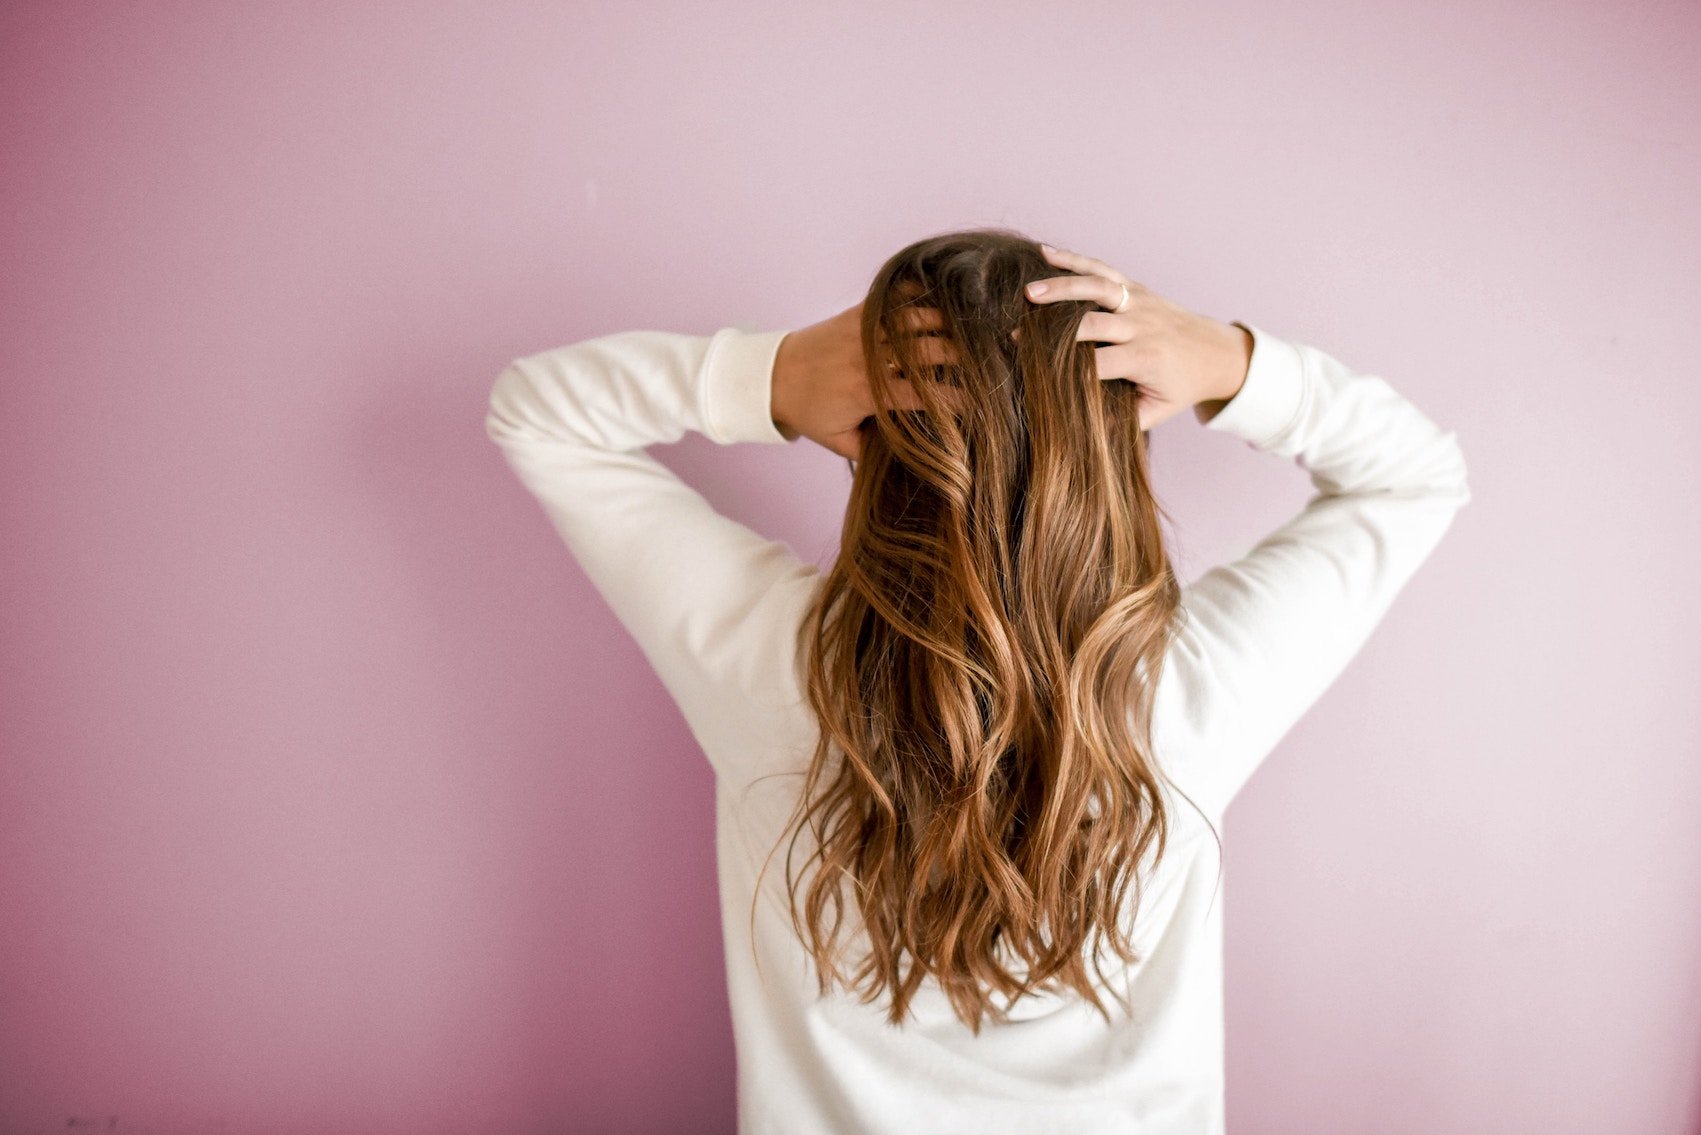 Female hair loss: Should you be worrying?